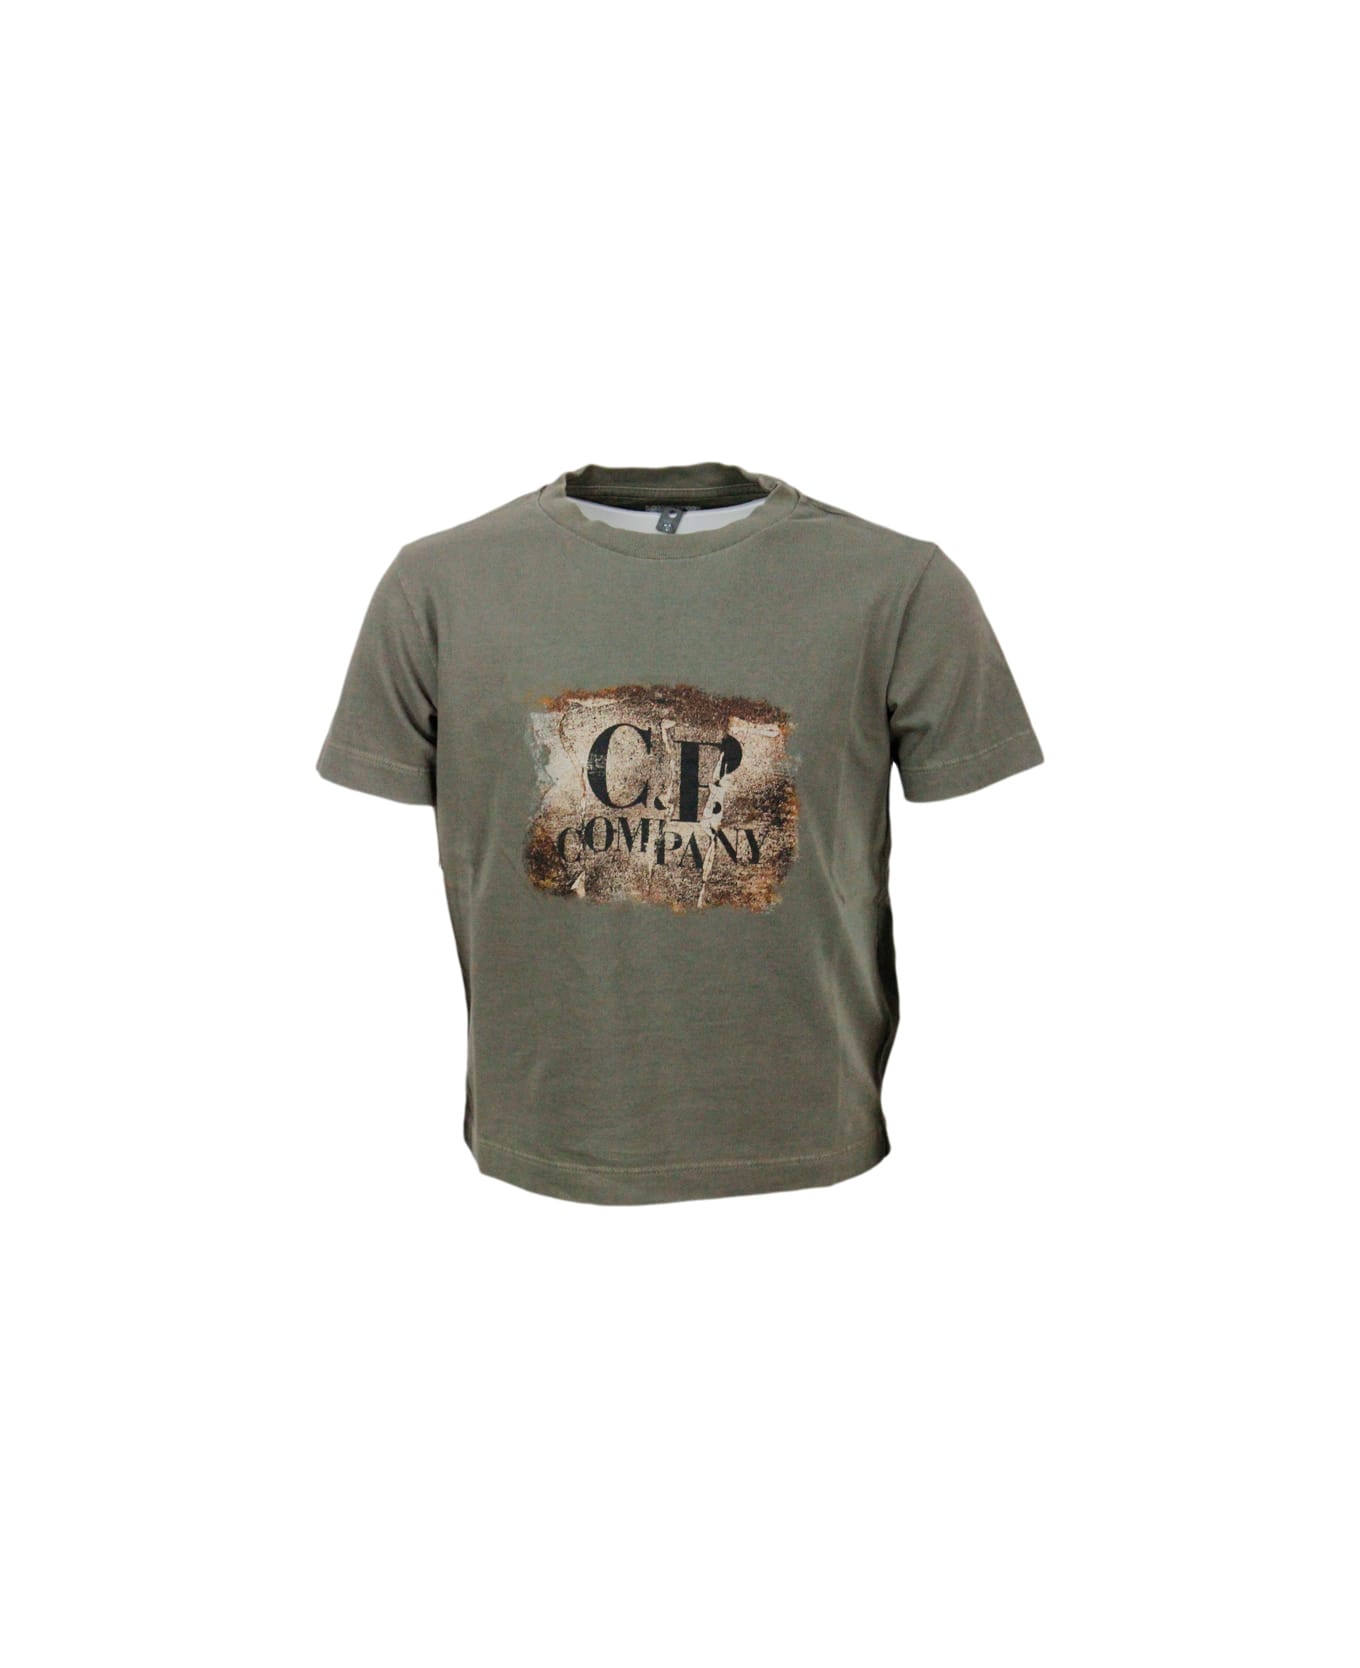 C.P. Company Garment-dyed Cotton Jersey Short-sleeved Crew Neck T-shirt With Logo On The Chest - Military